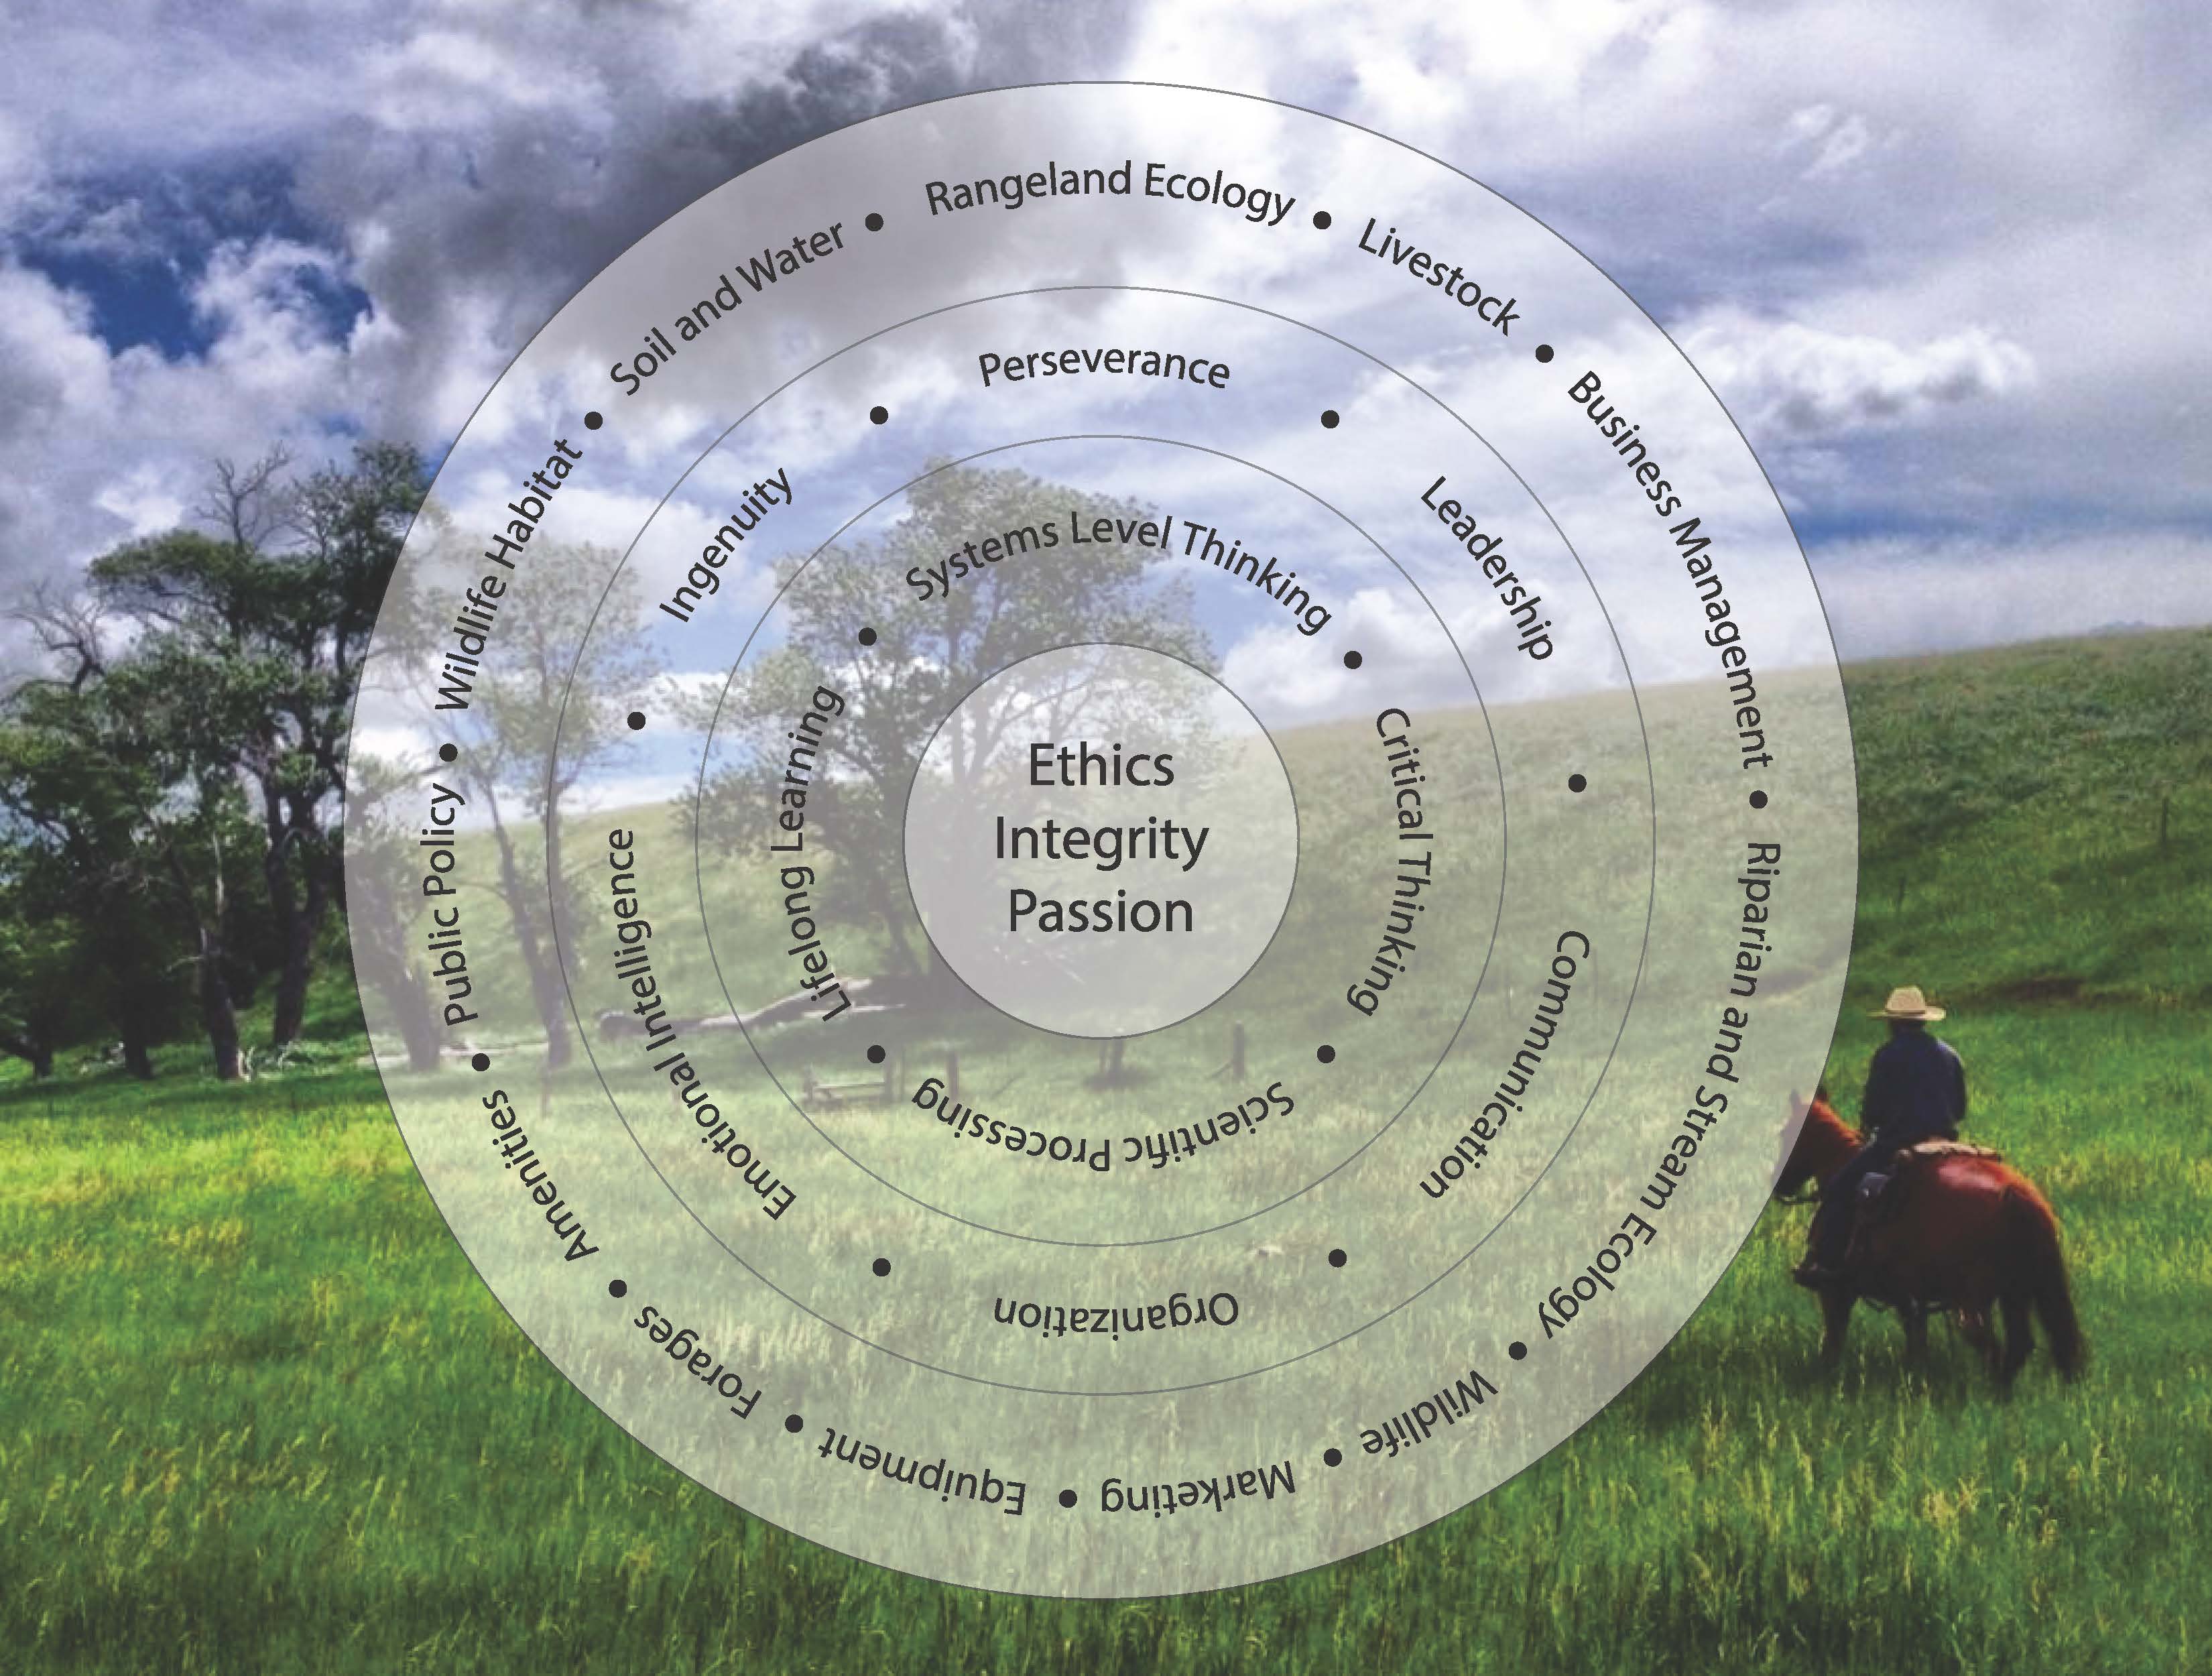 A circular chart of the ranch managment program showing the progression from the outer circle to reach the inner circl of ethics, integrity and passion.